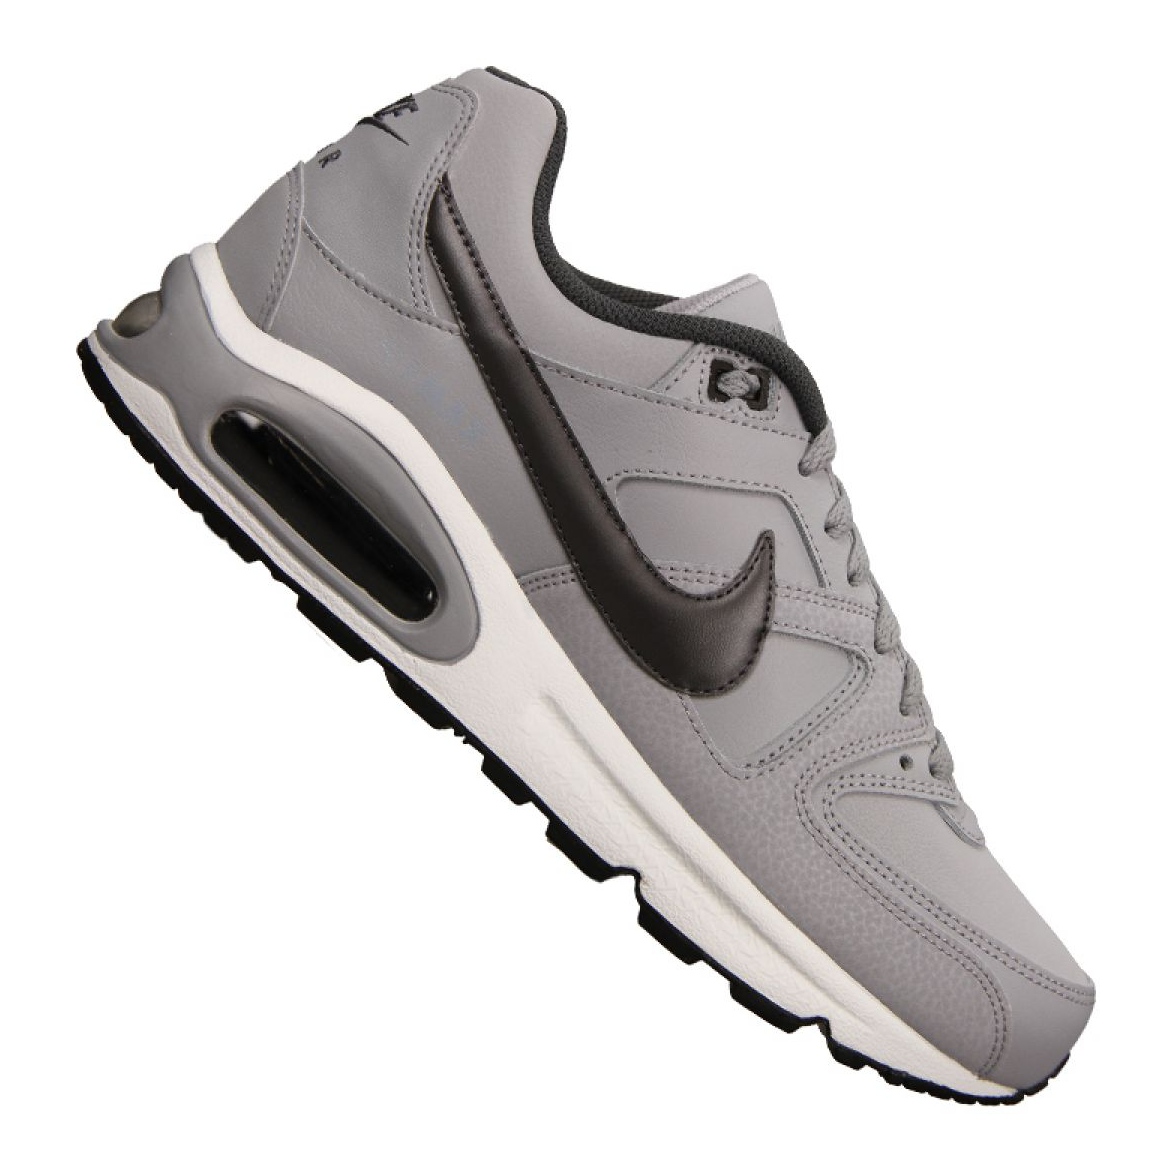 Frontier Vejnavn Eastern Nike Air Max Command Leather M 749760-012 grey - KeeShoes